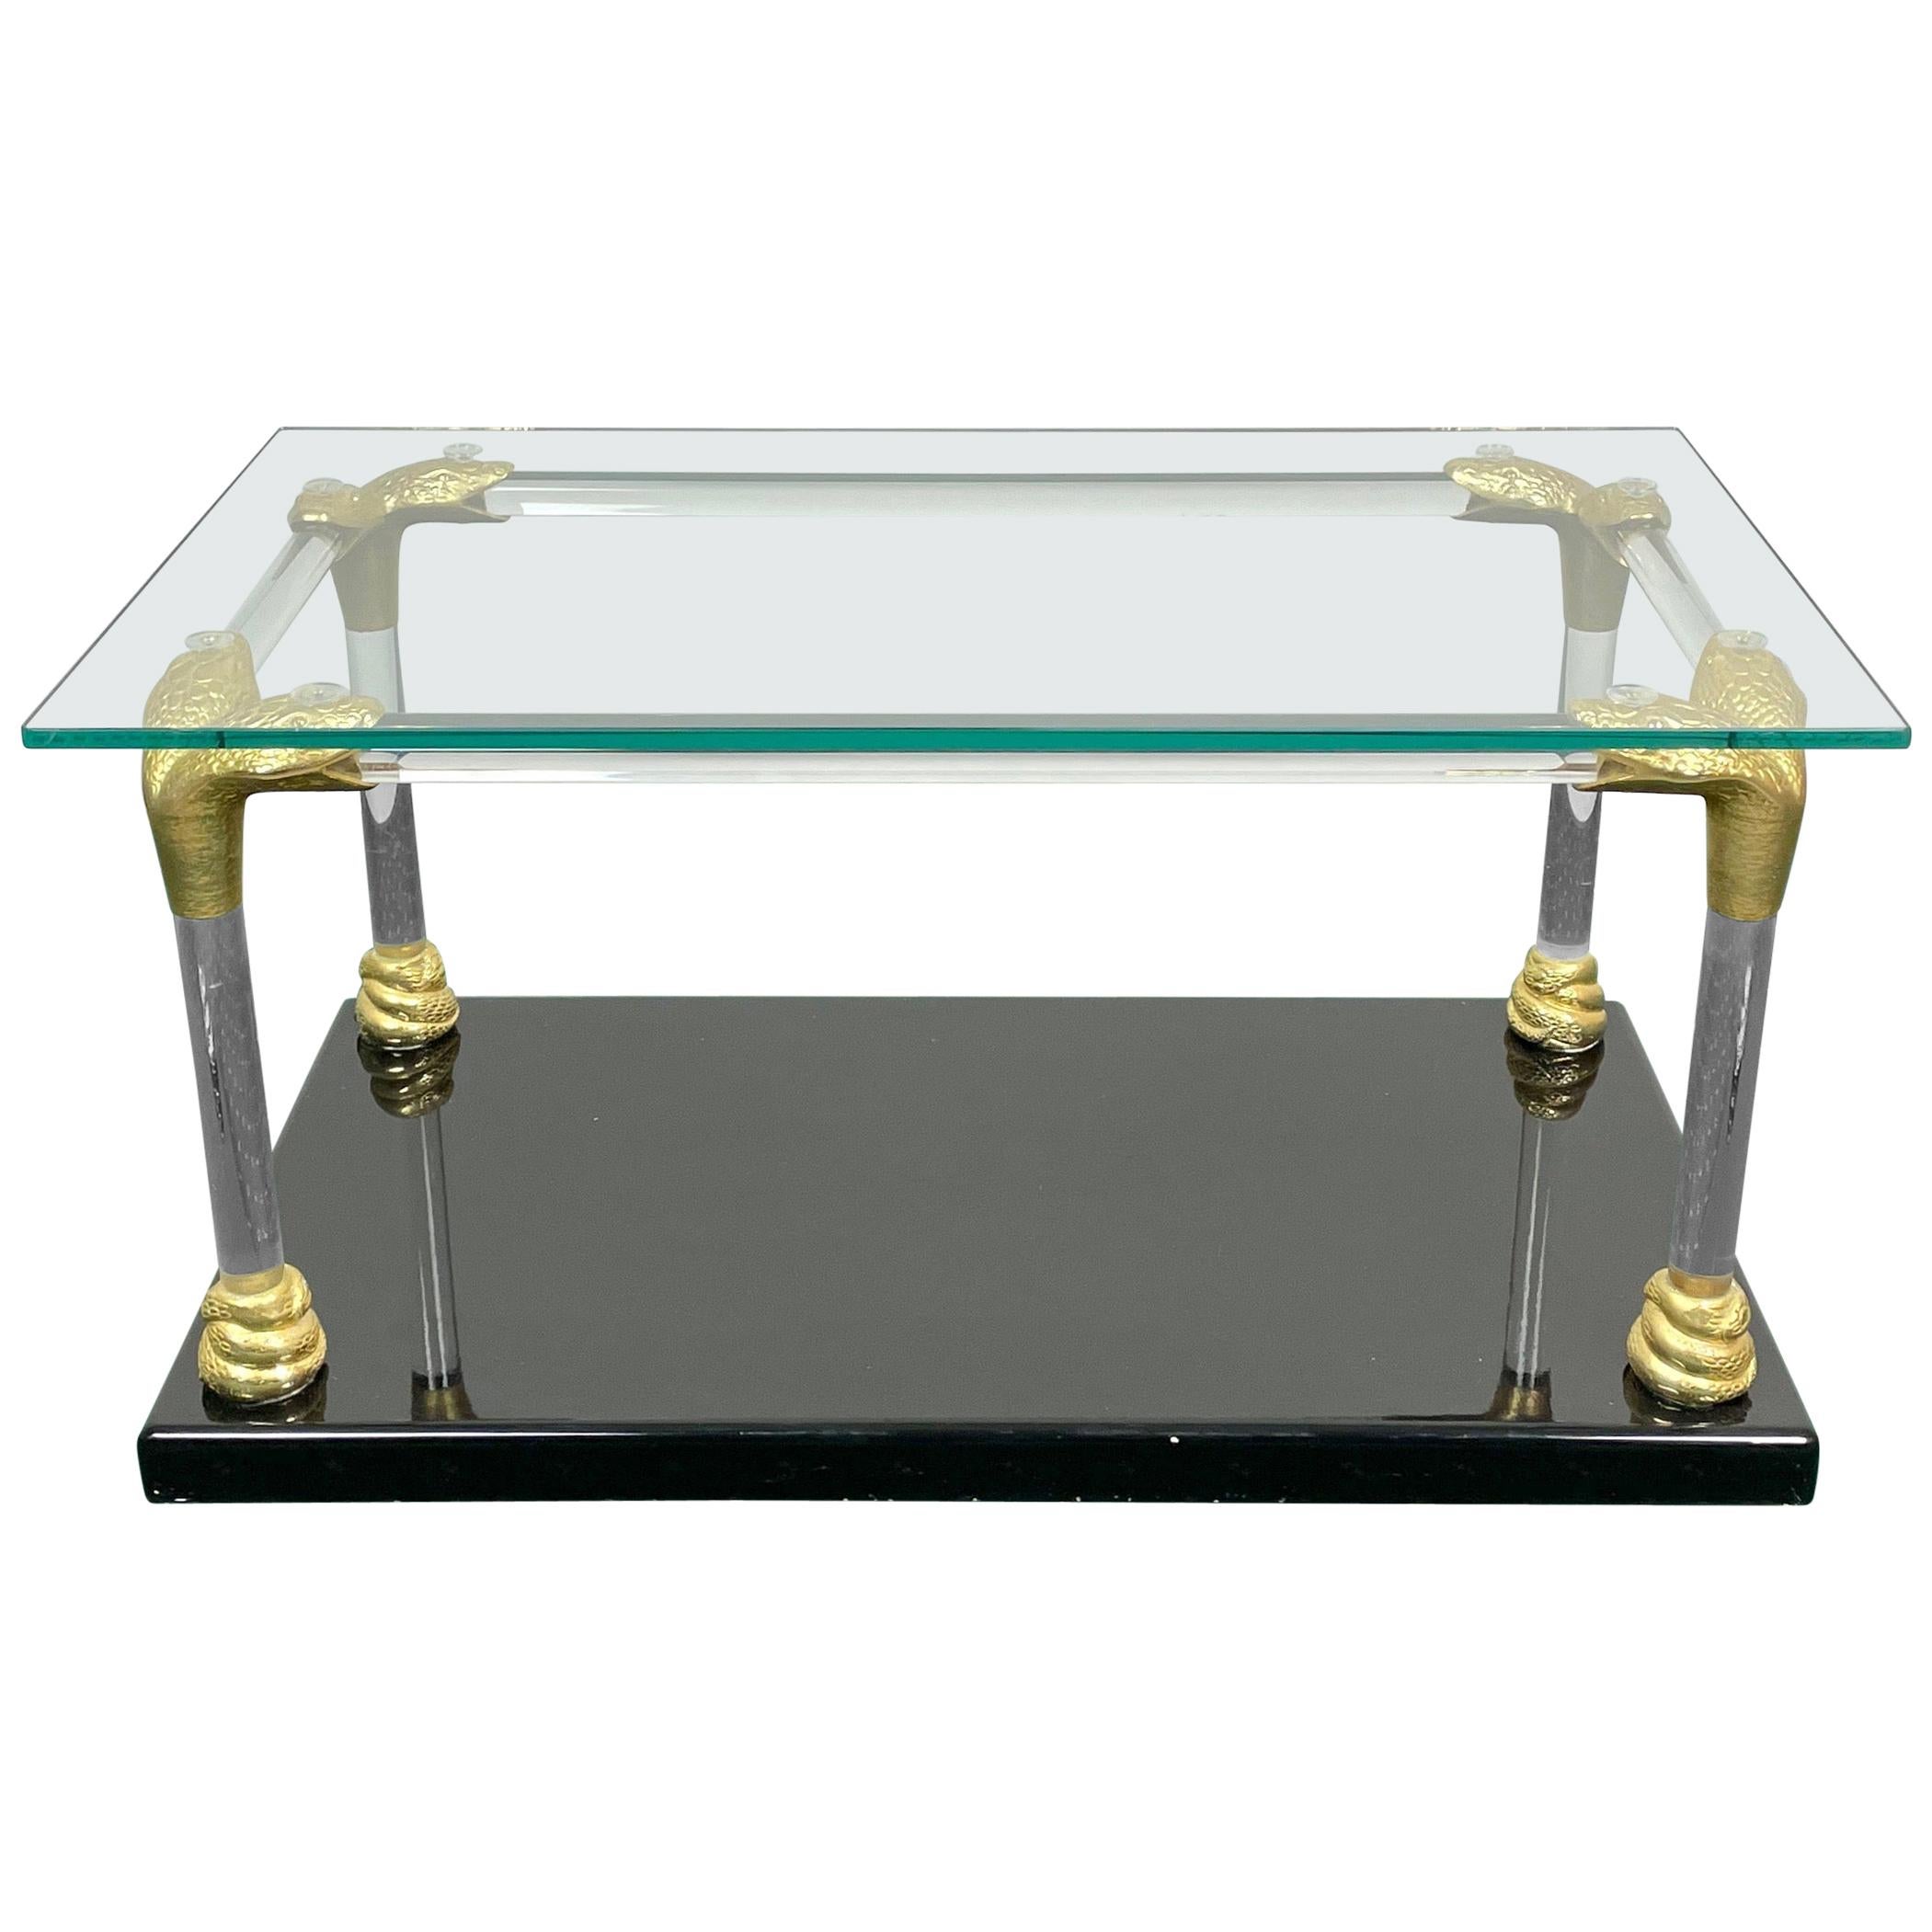 Lucite, Wood and Brass Coffee Table with Snake Head Details, Italy, 1970s For Sale